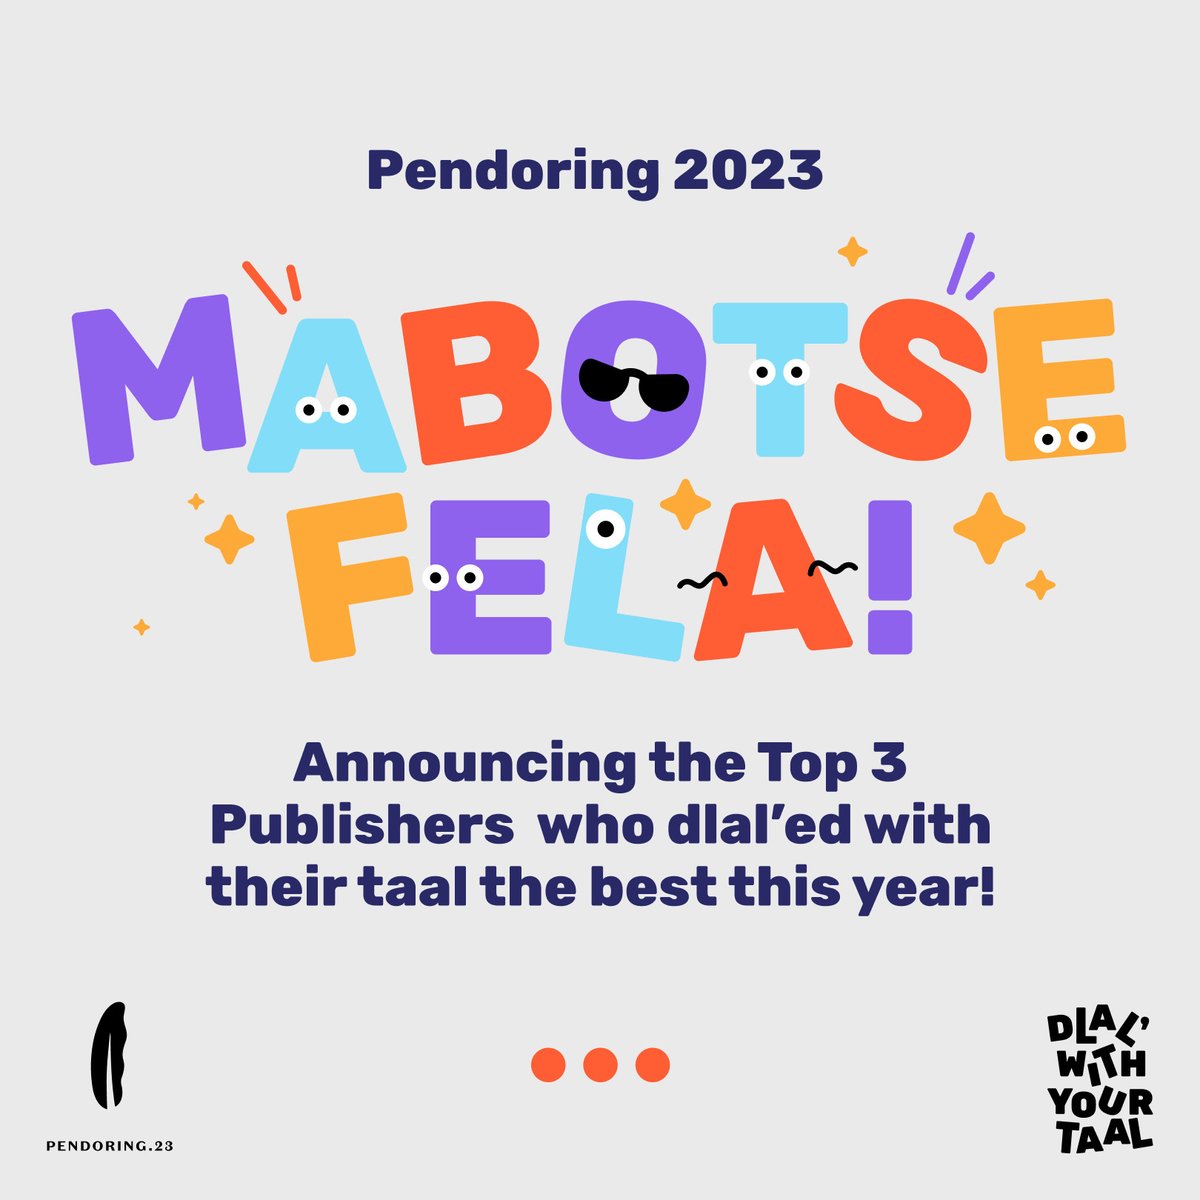 Congratulations to the Top 3 Publishers of #Pendoring2023 for dlal'ing with your taal.
1. @PanMacmillanSA 
2. @_DavidPhilipPub 
3. @LAPAUitgewers 

Do you need an additional trophy or certificate? Order before 8 December 2023 here: bit.ly/3t2i4B5   

#SpeakSouthAfrican